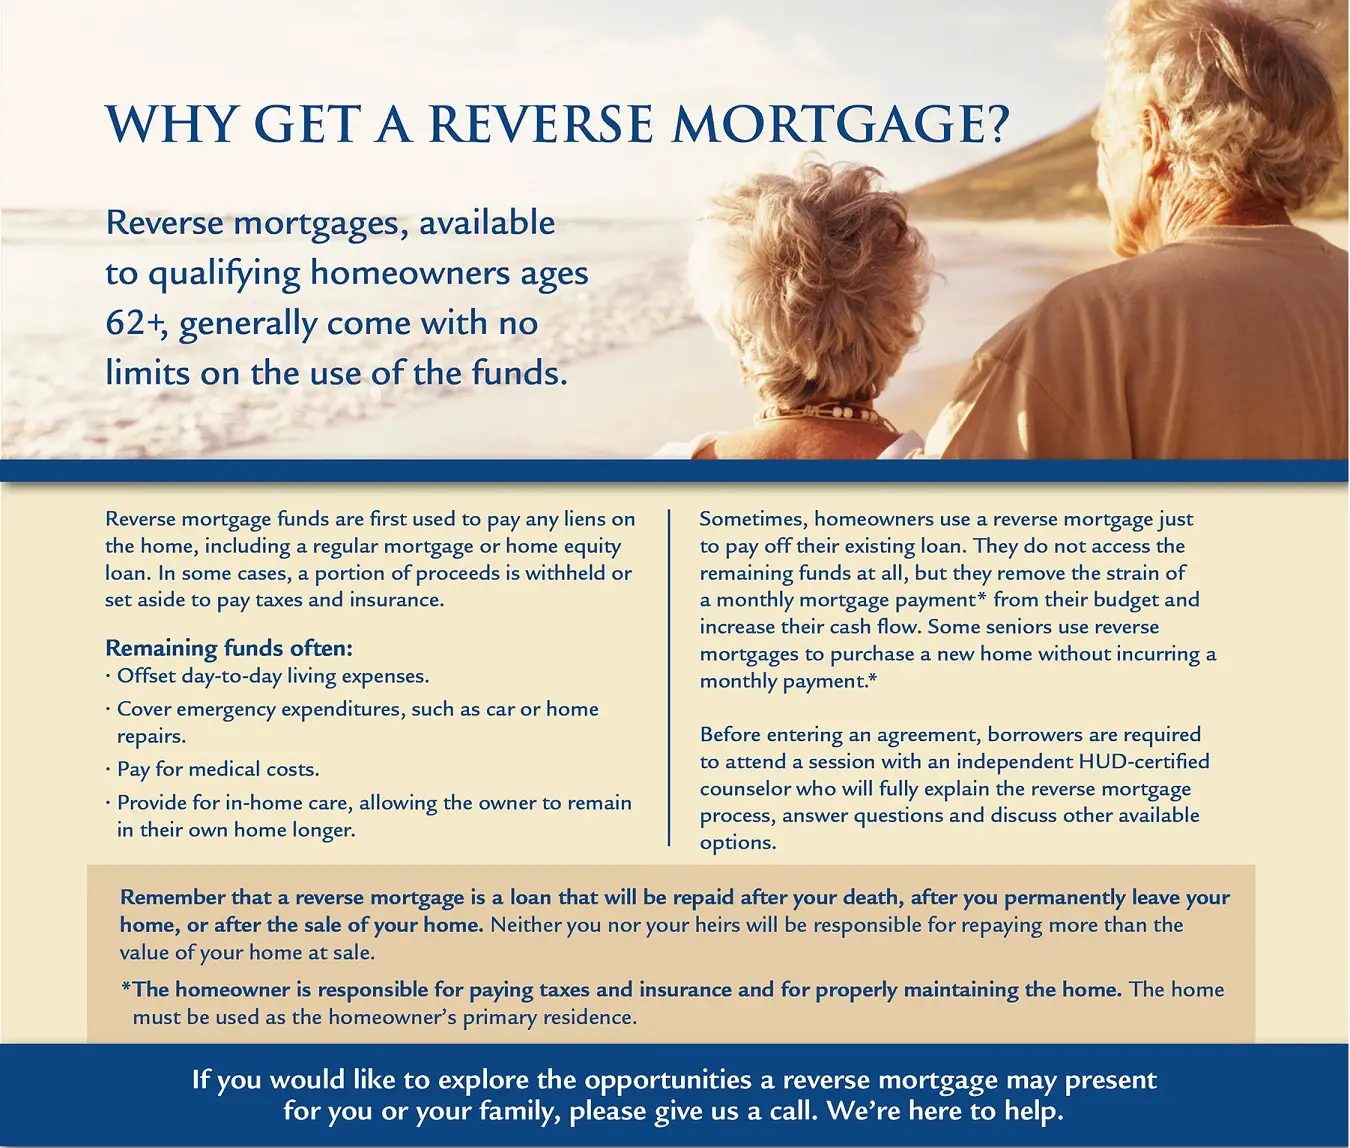 How a reverse mortgage helped an 84